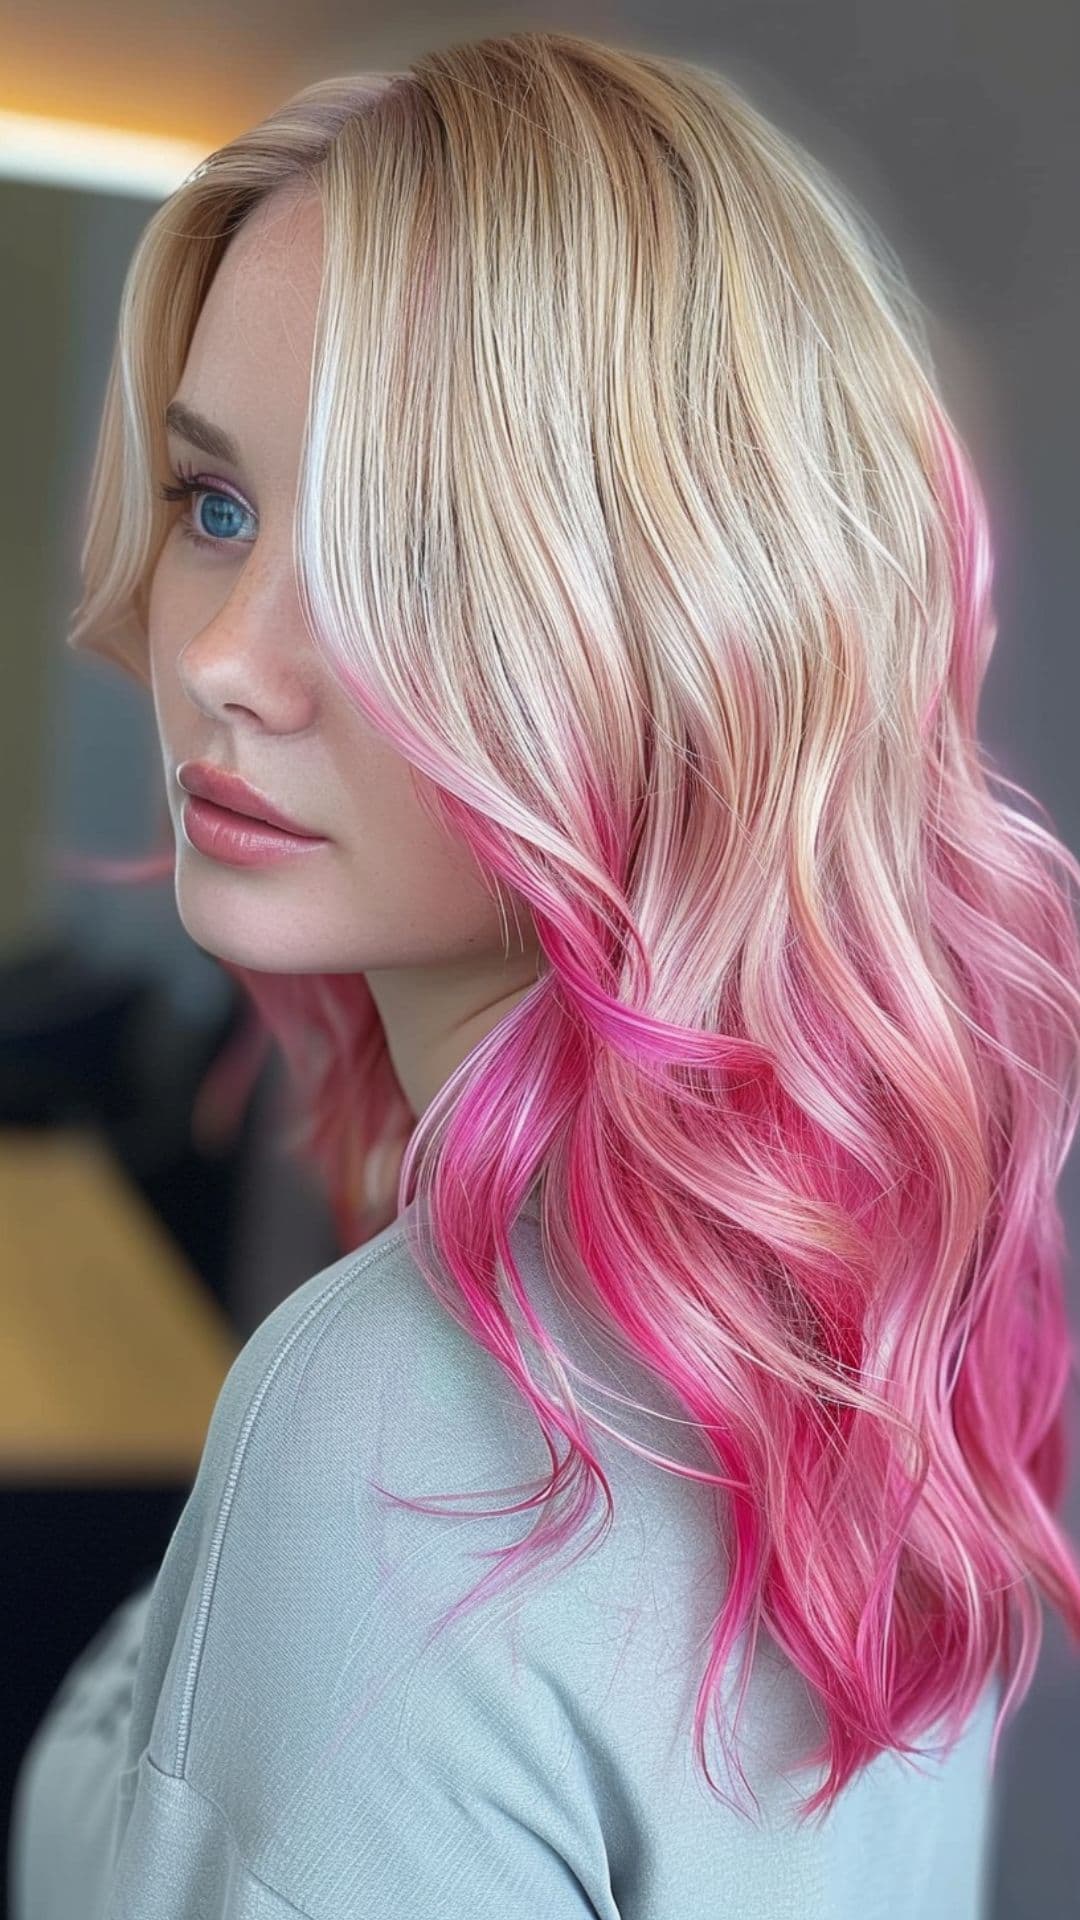 A woman modelling a blonde and pink hair.